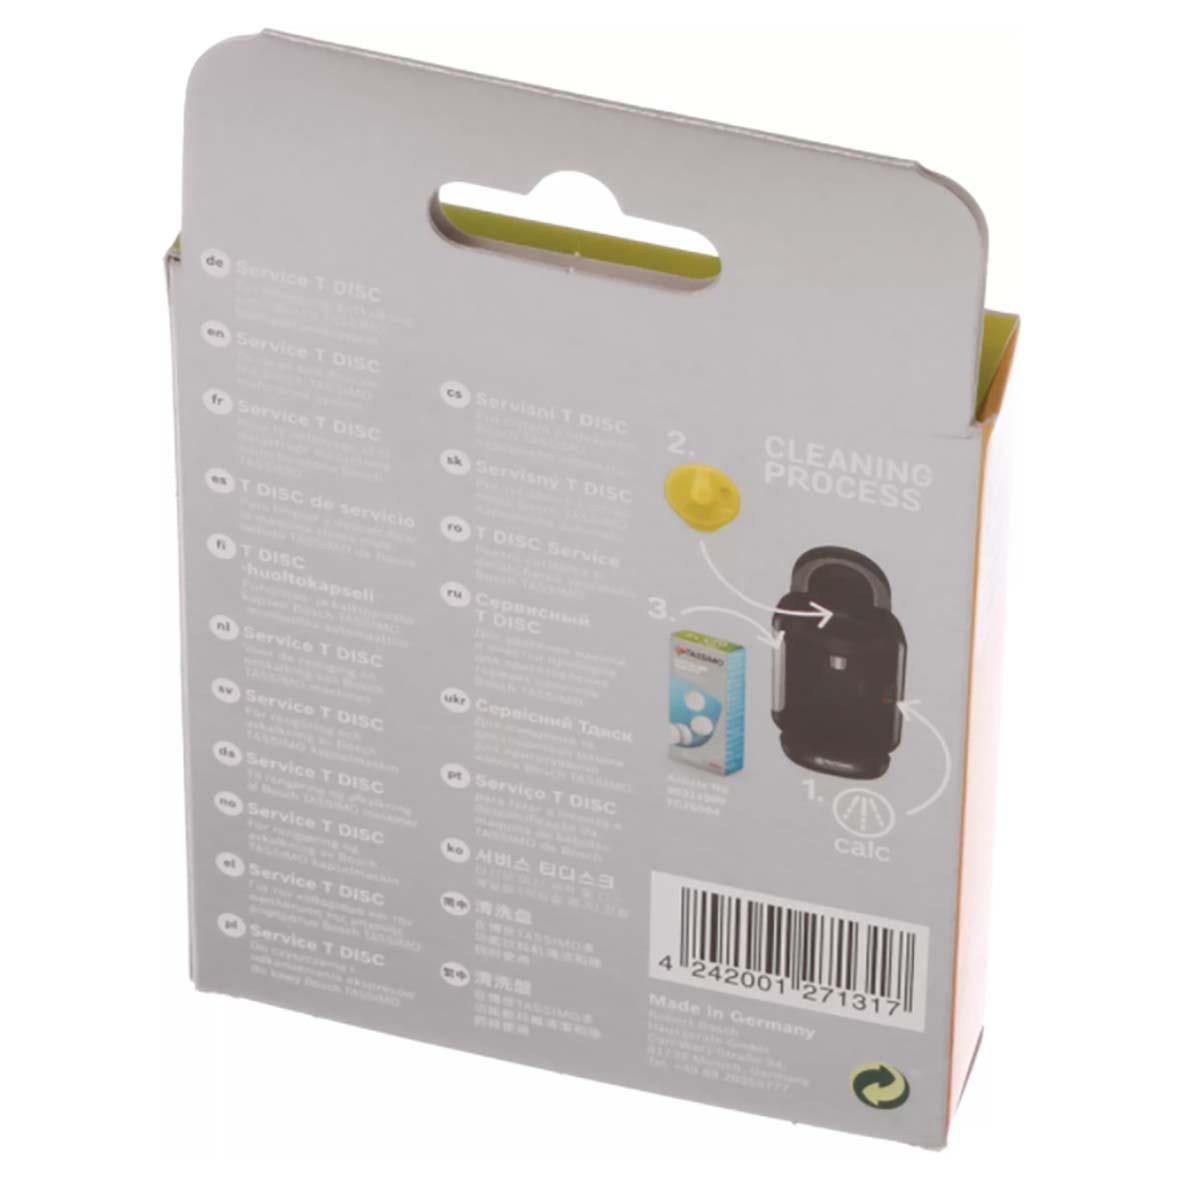 Bosch T-Disc for Tassimo Coffee Machine Yellow Replaces 00576836, 00611632, 00617771, 00621101